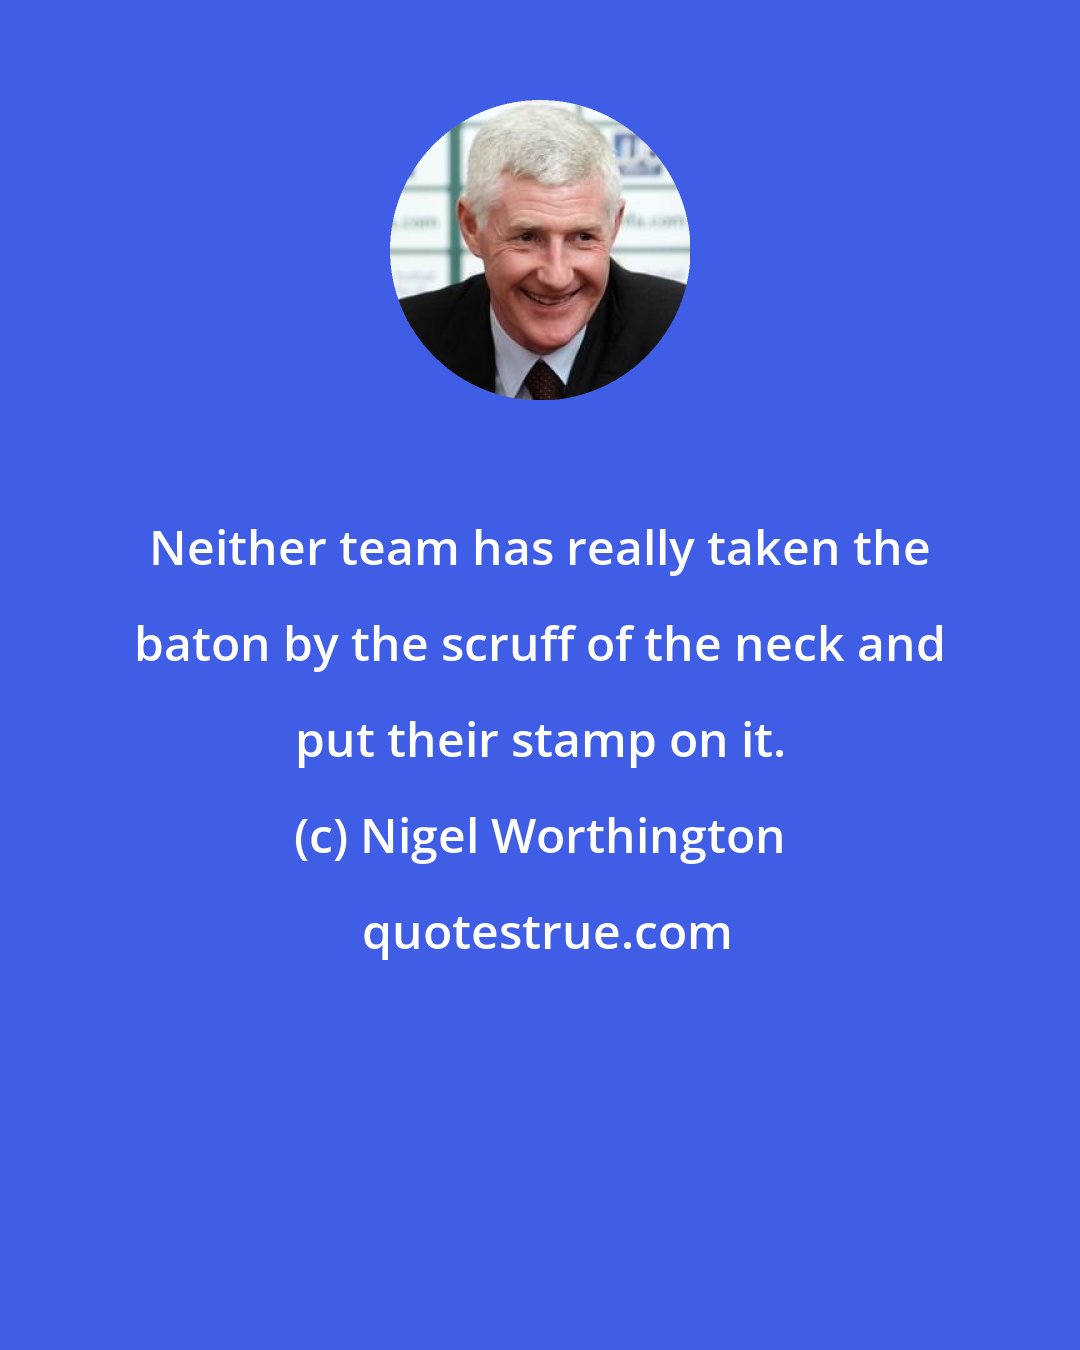 Nigel Worthington: Neither team has really taken the baton by the scruff of the neck and put their stamp on it.